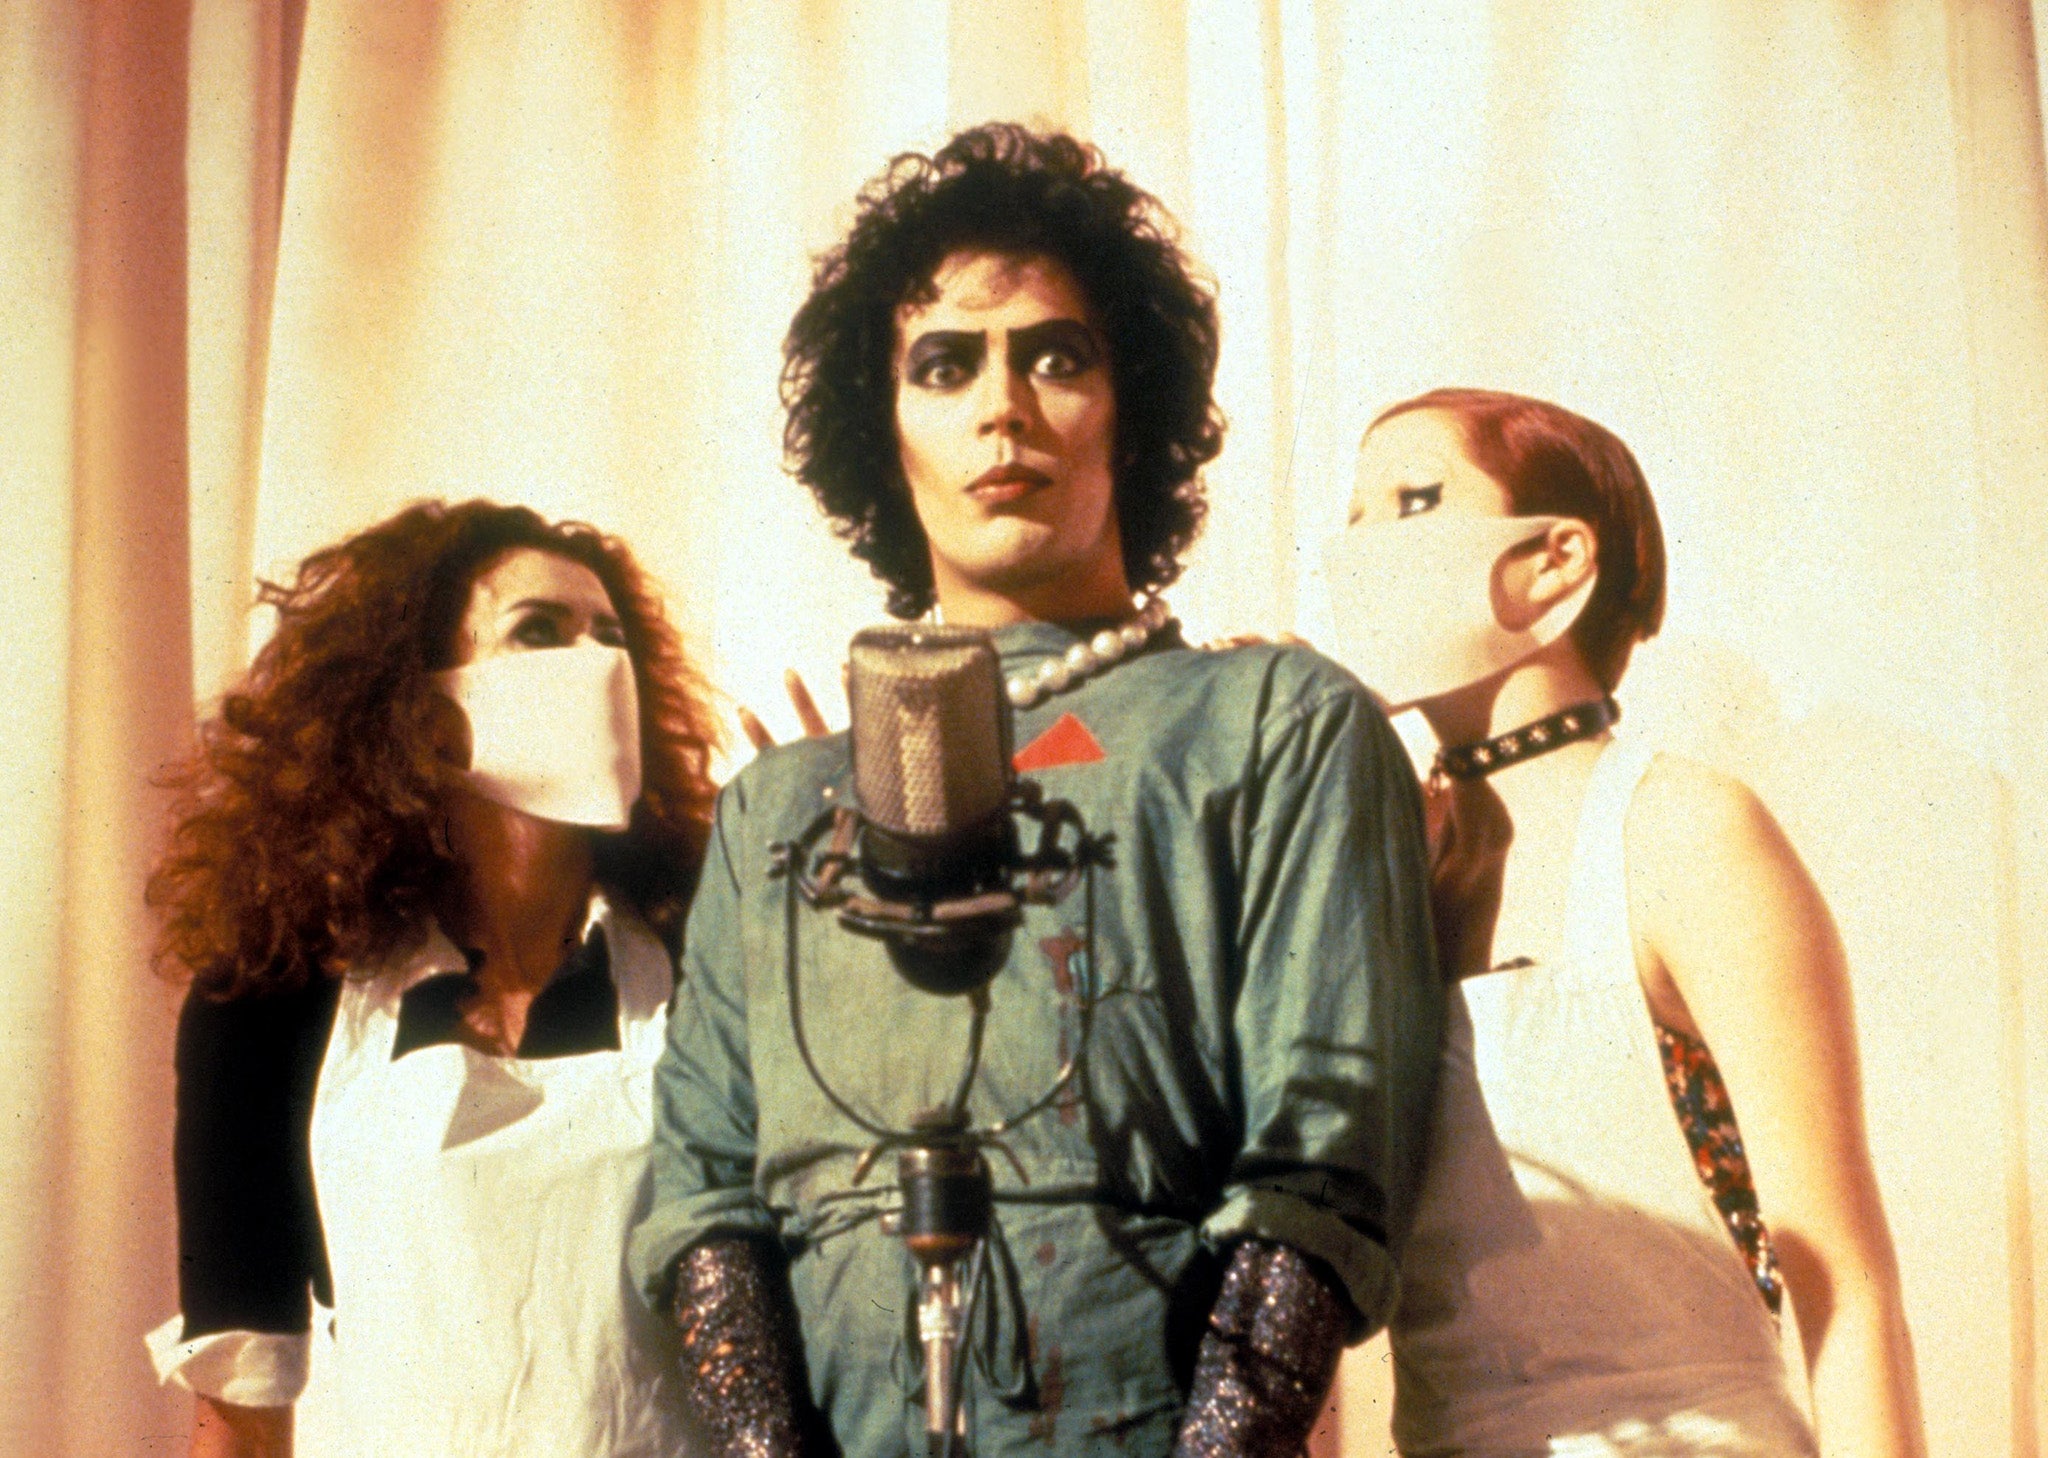 A film still from 1975's The Rocky Horror Picture Show